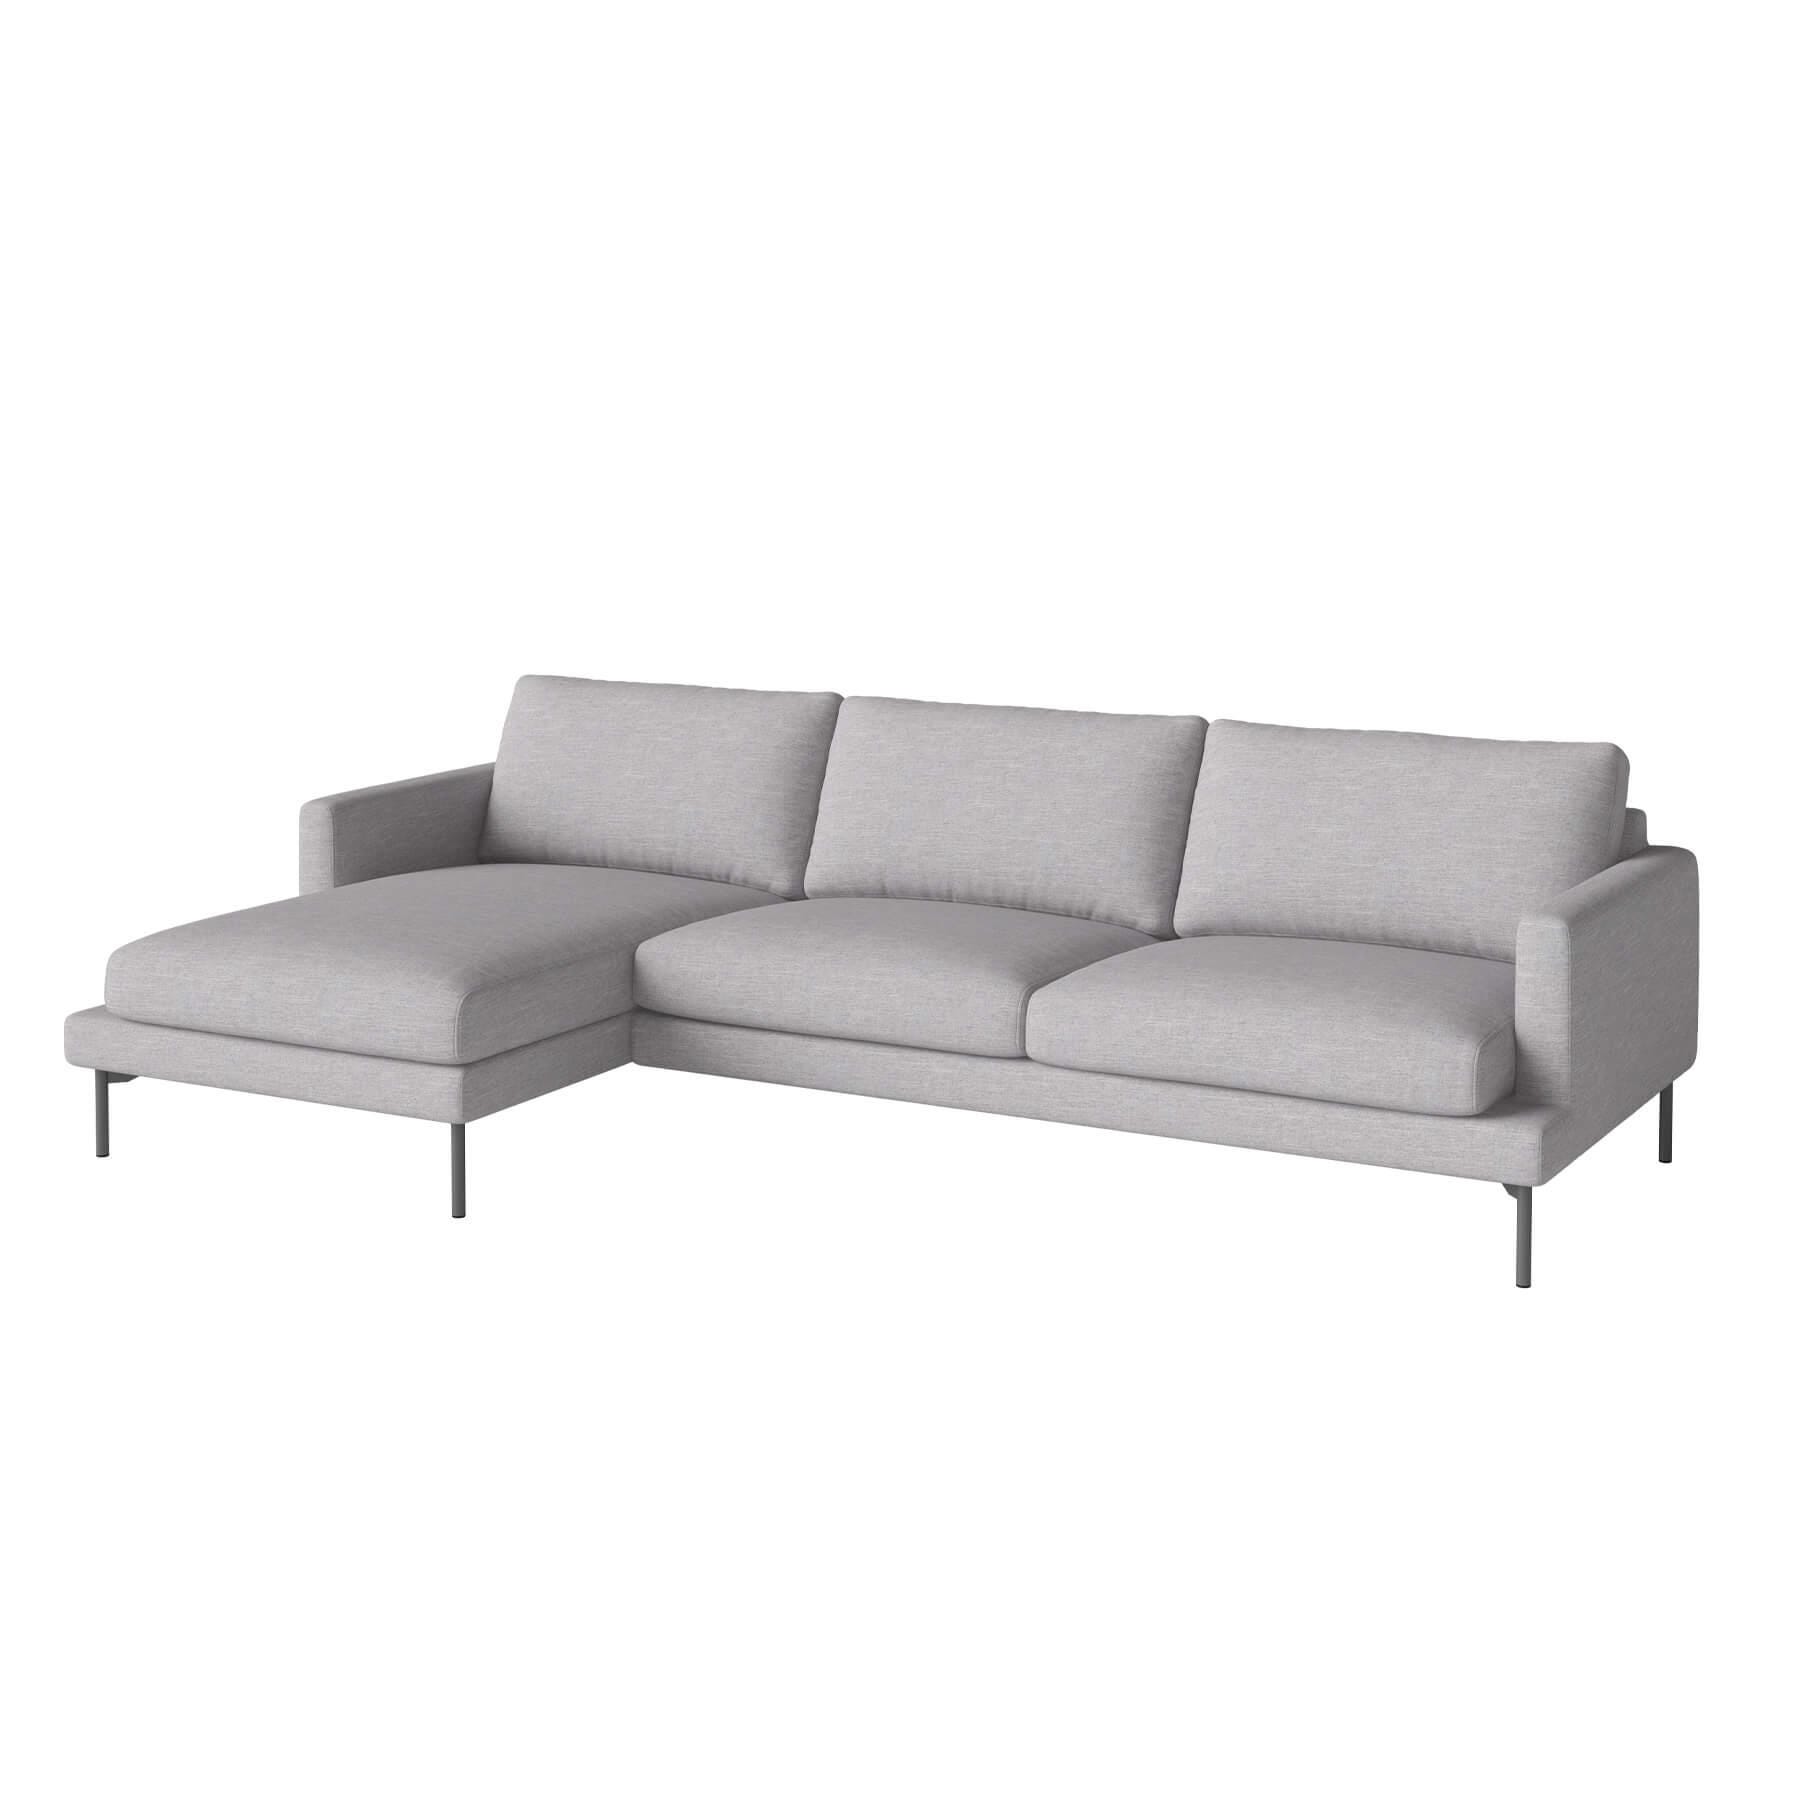 Bolia Veneda Sofa 35 Seater Sofa With Chaise Longue Grey Laquered Steel London Dust Green Left Designer Furniture From Holloways Of Ludlow